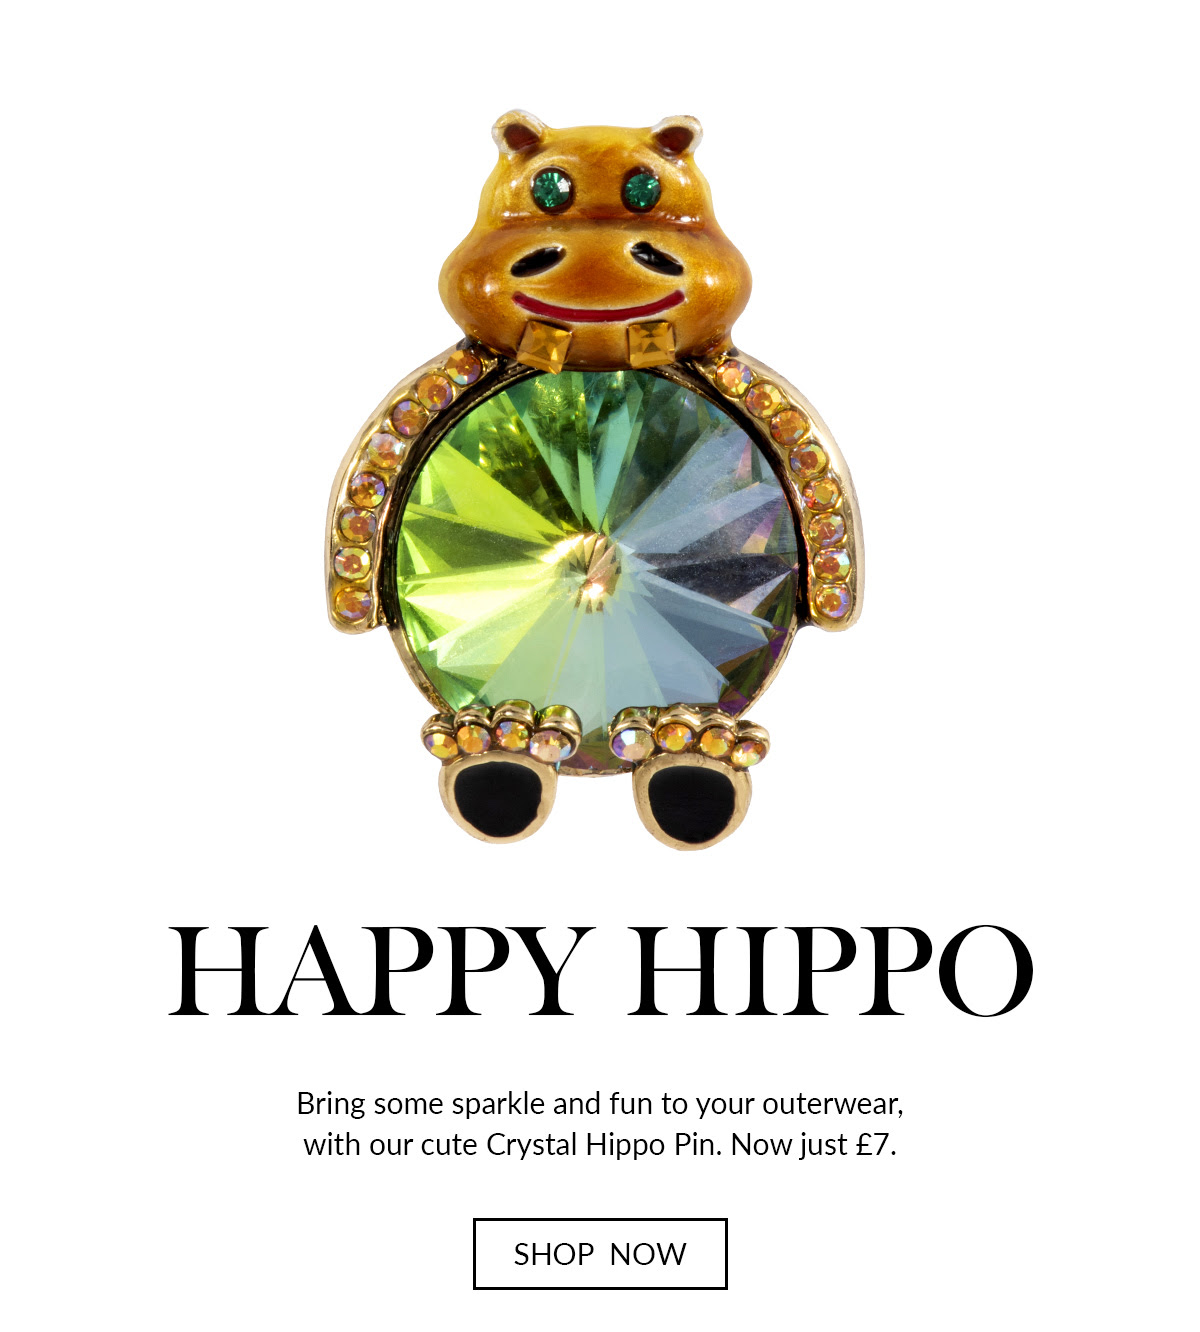 Butler & Wilson - Crystal Hippo Pin now just £7